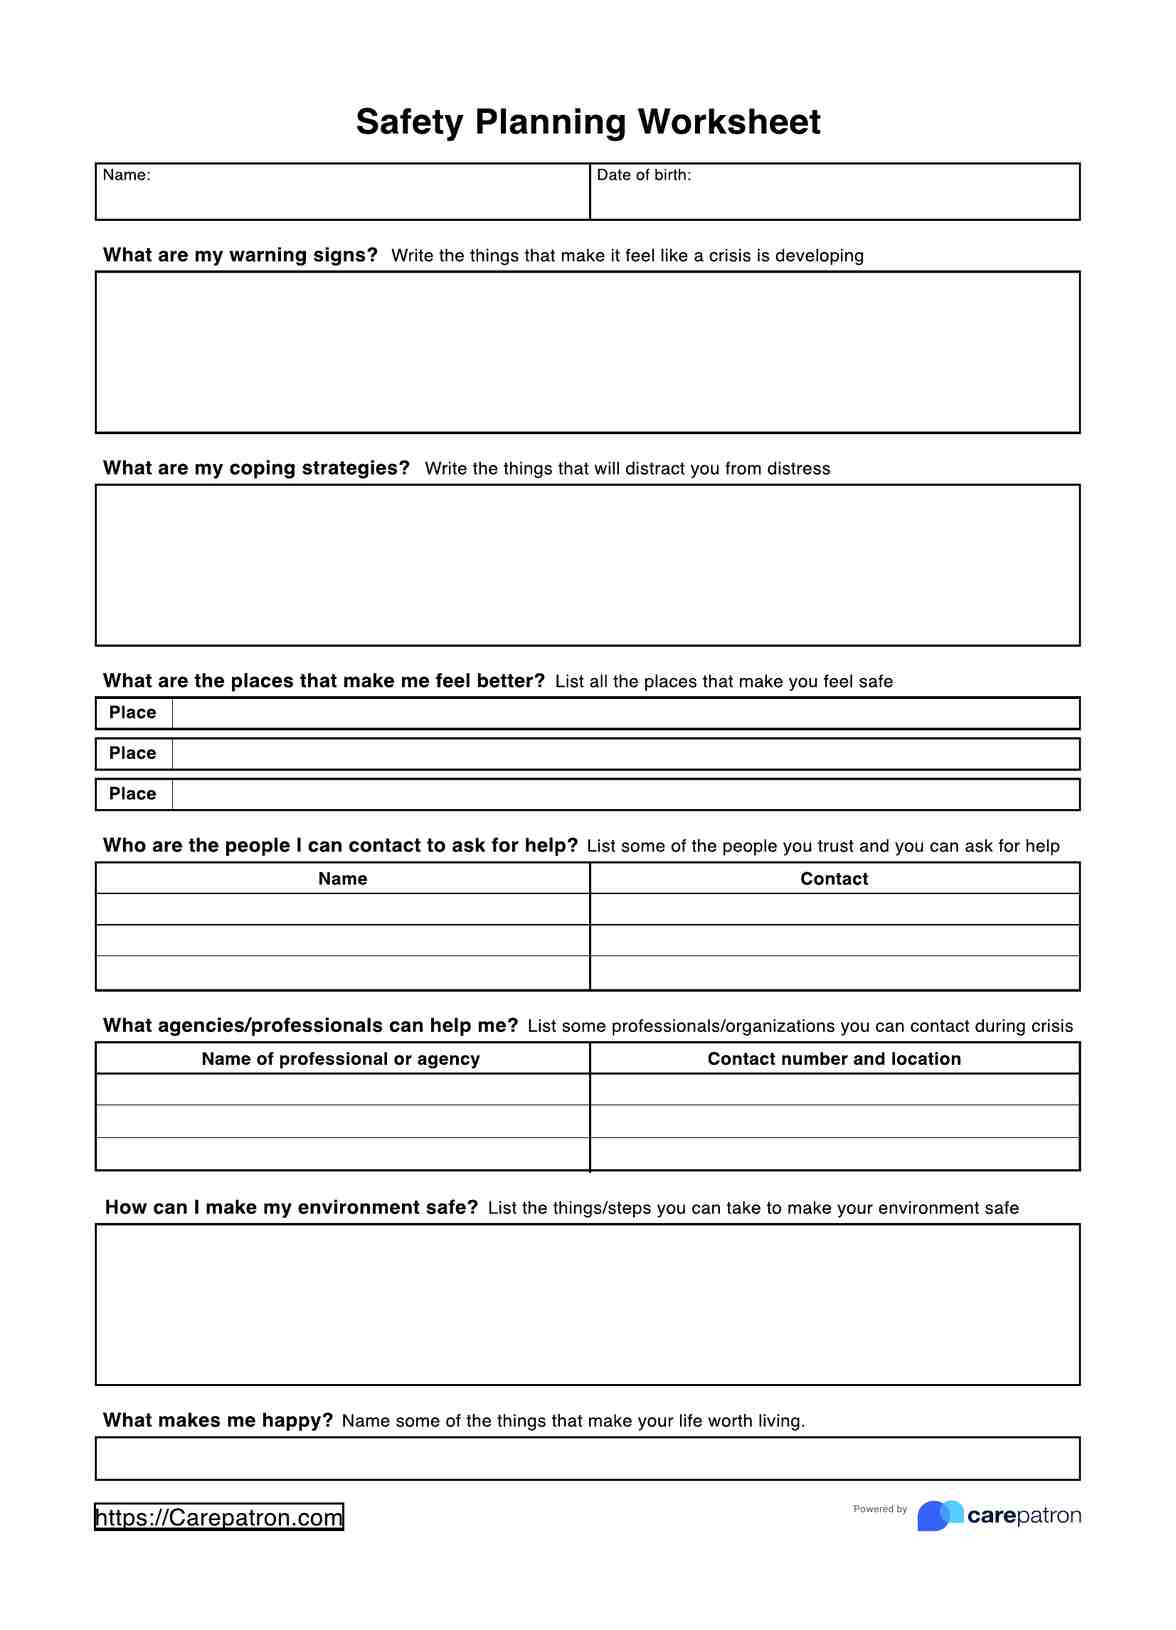 Safety Planning Worksheets PDF Example